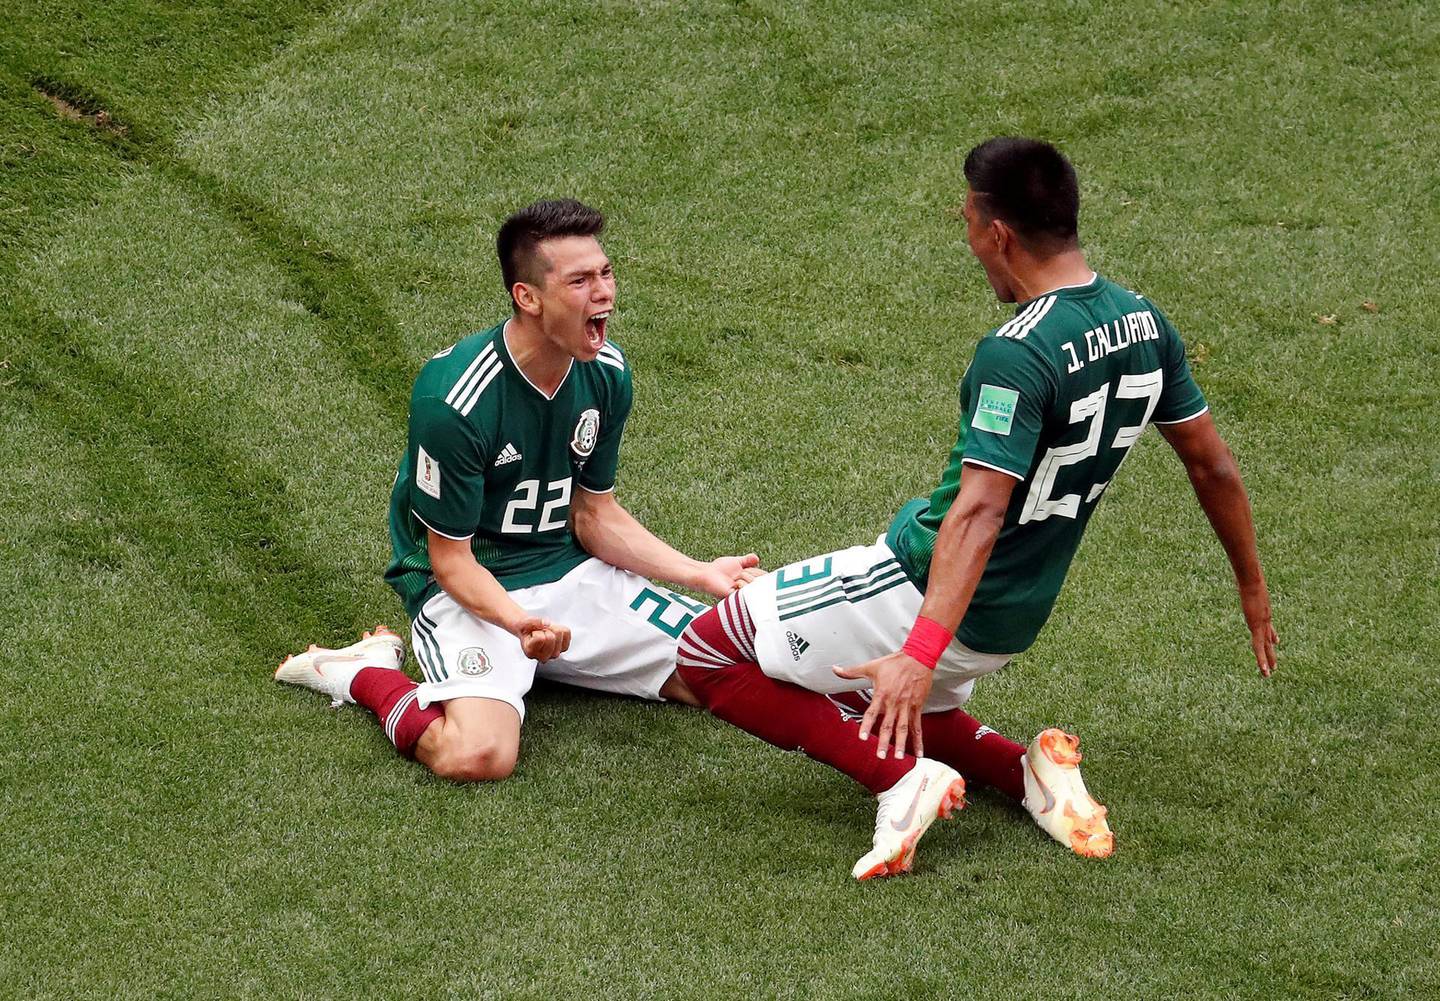 Soccer Football - World Cup - Group F - Germany vs Mexico - Luzhniki Stadium, Moscow, Russia - June 17, 2018   Mexico's Hirving Lozano celebrates scoring their first goal with Jesus Gallardo             REUTERS/Christian Hartmann     TPX IMAGES OF THE DAY